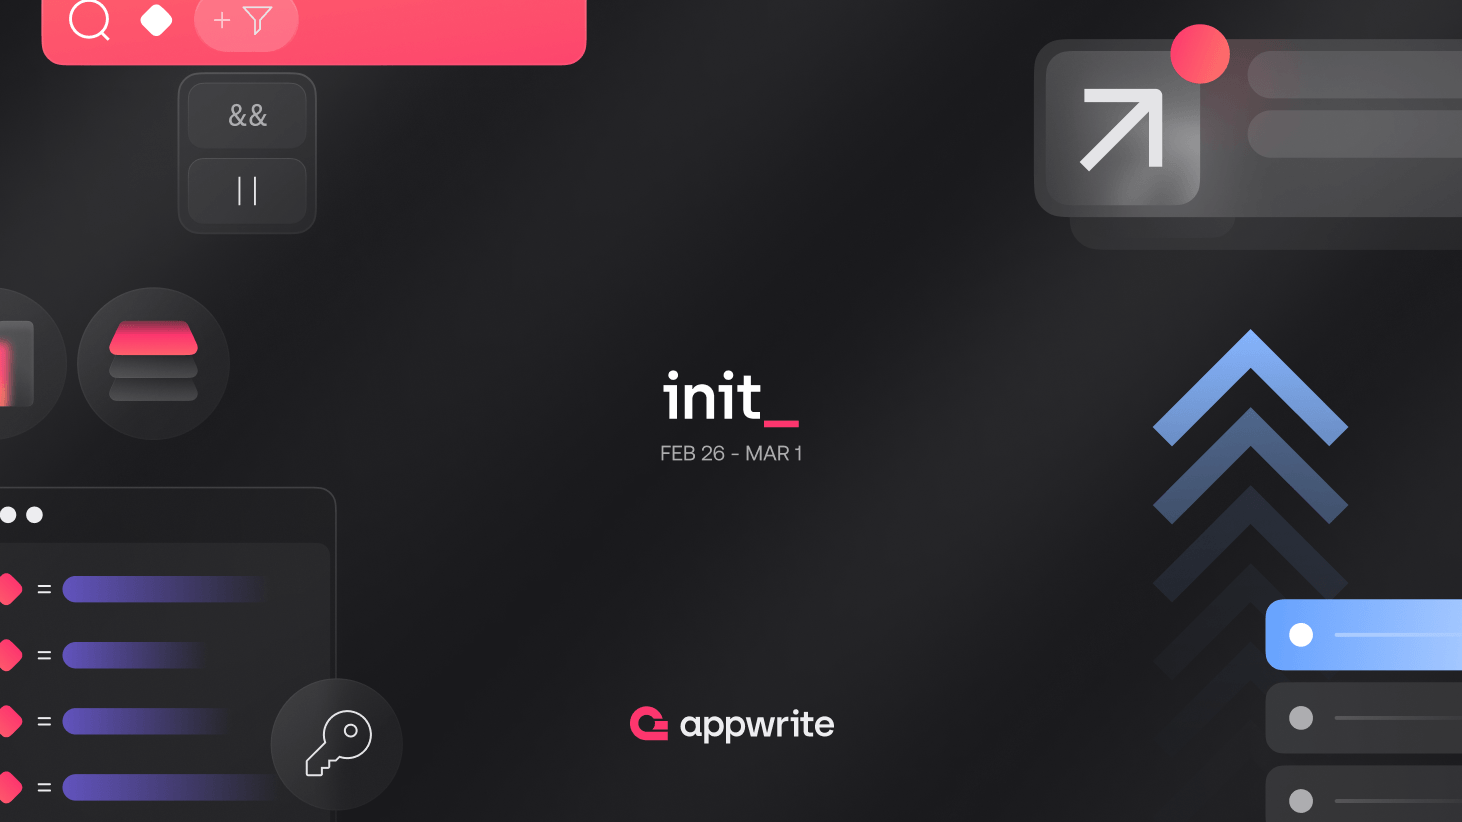 Announcing Init. The start of something new.